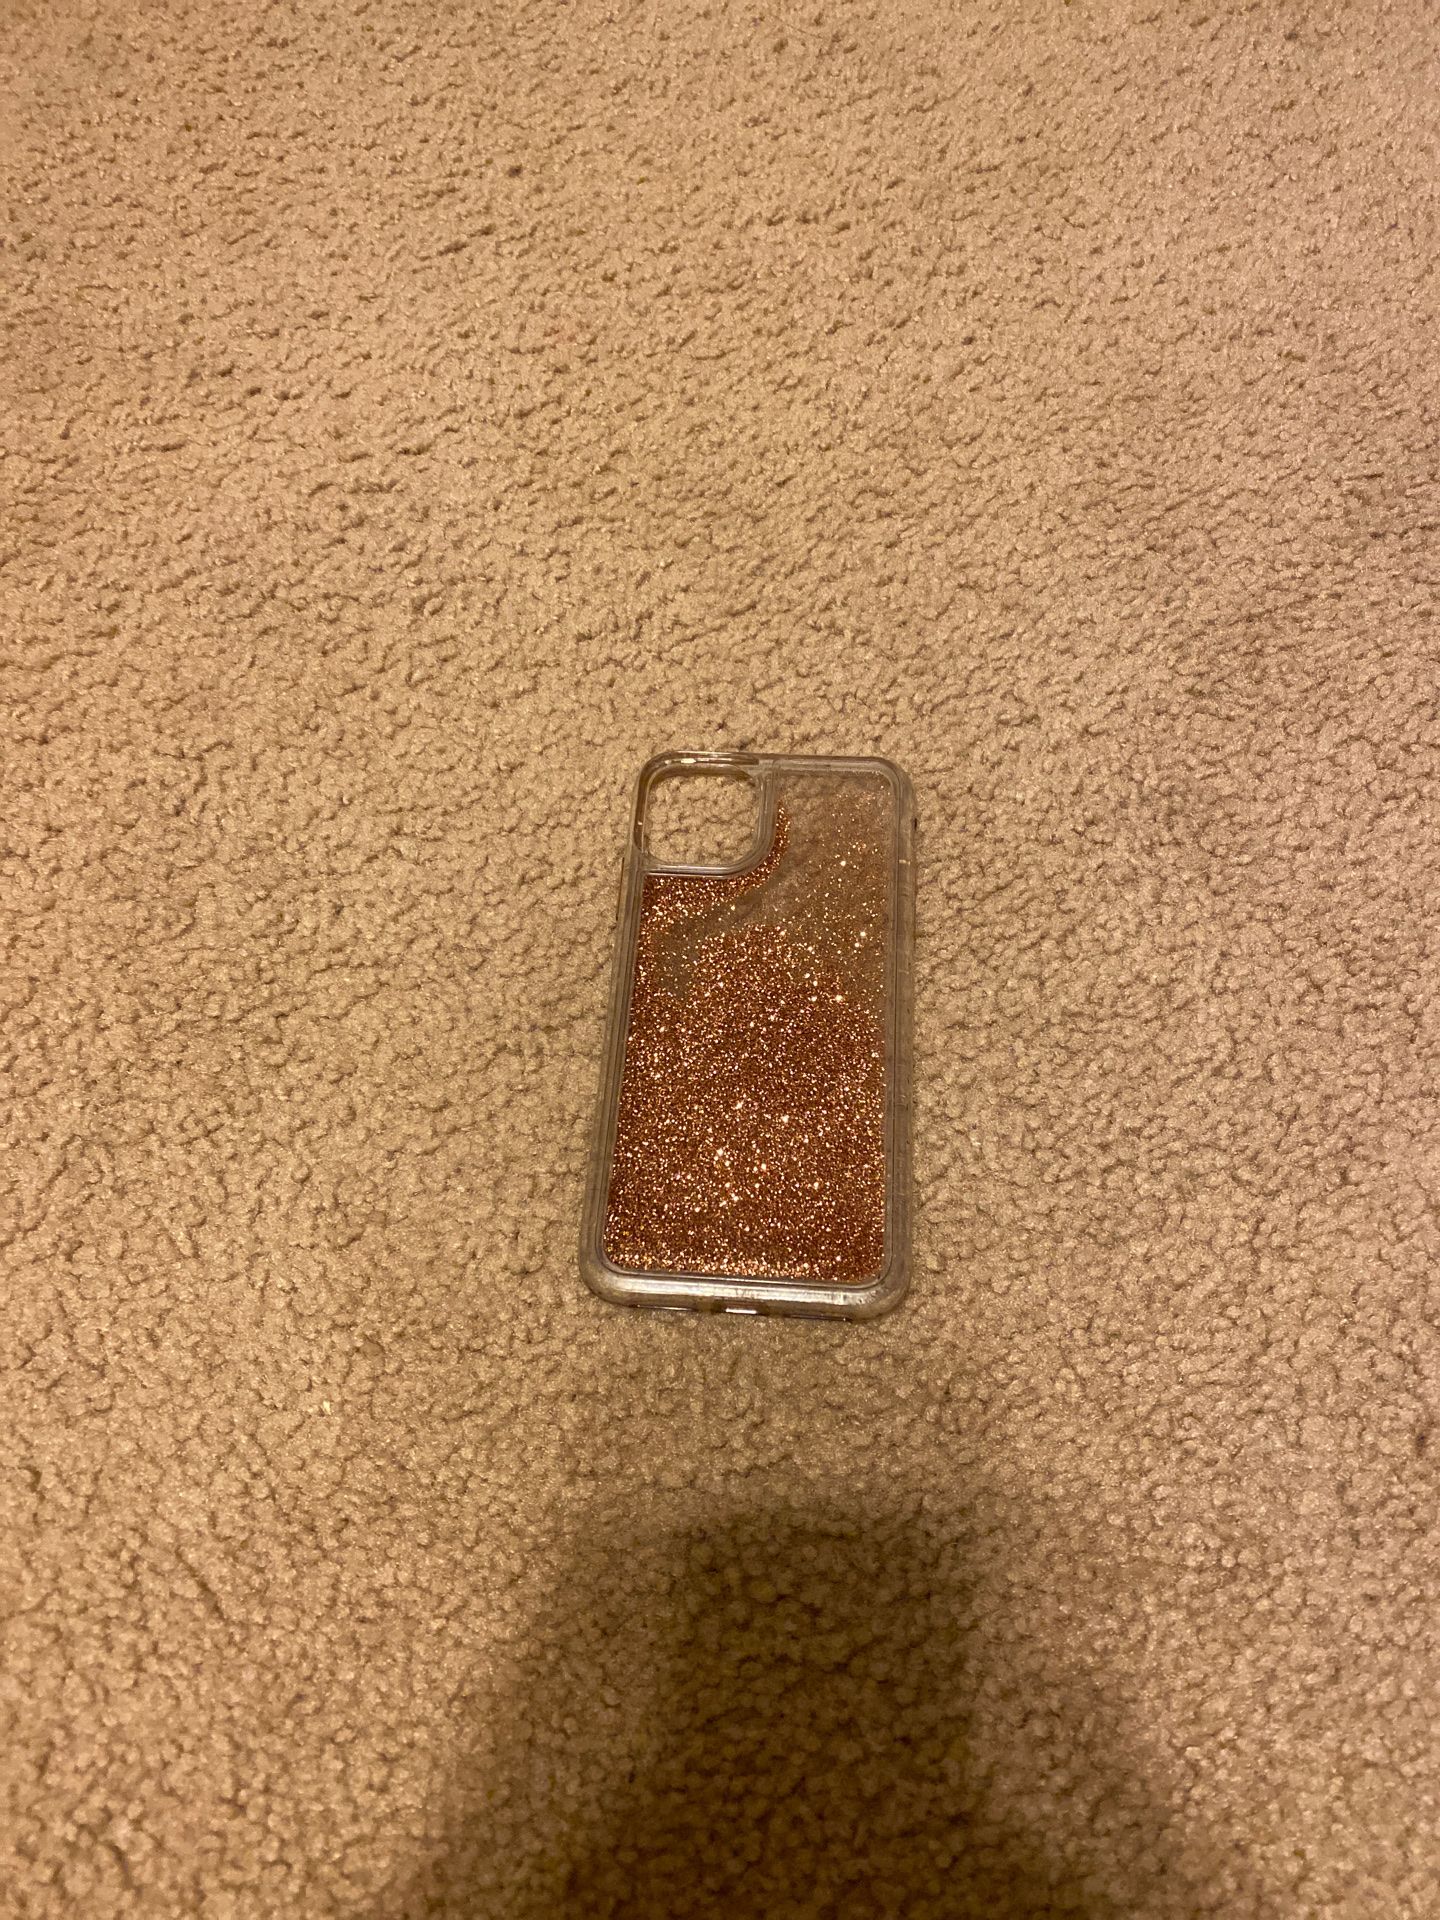 iPhone case moving glitter iPhone 11 max